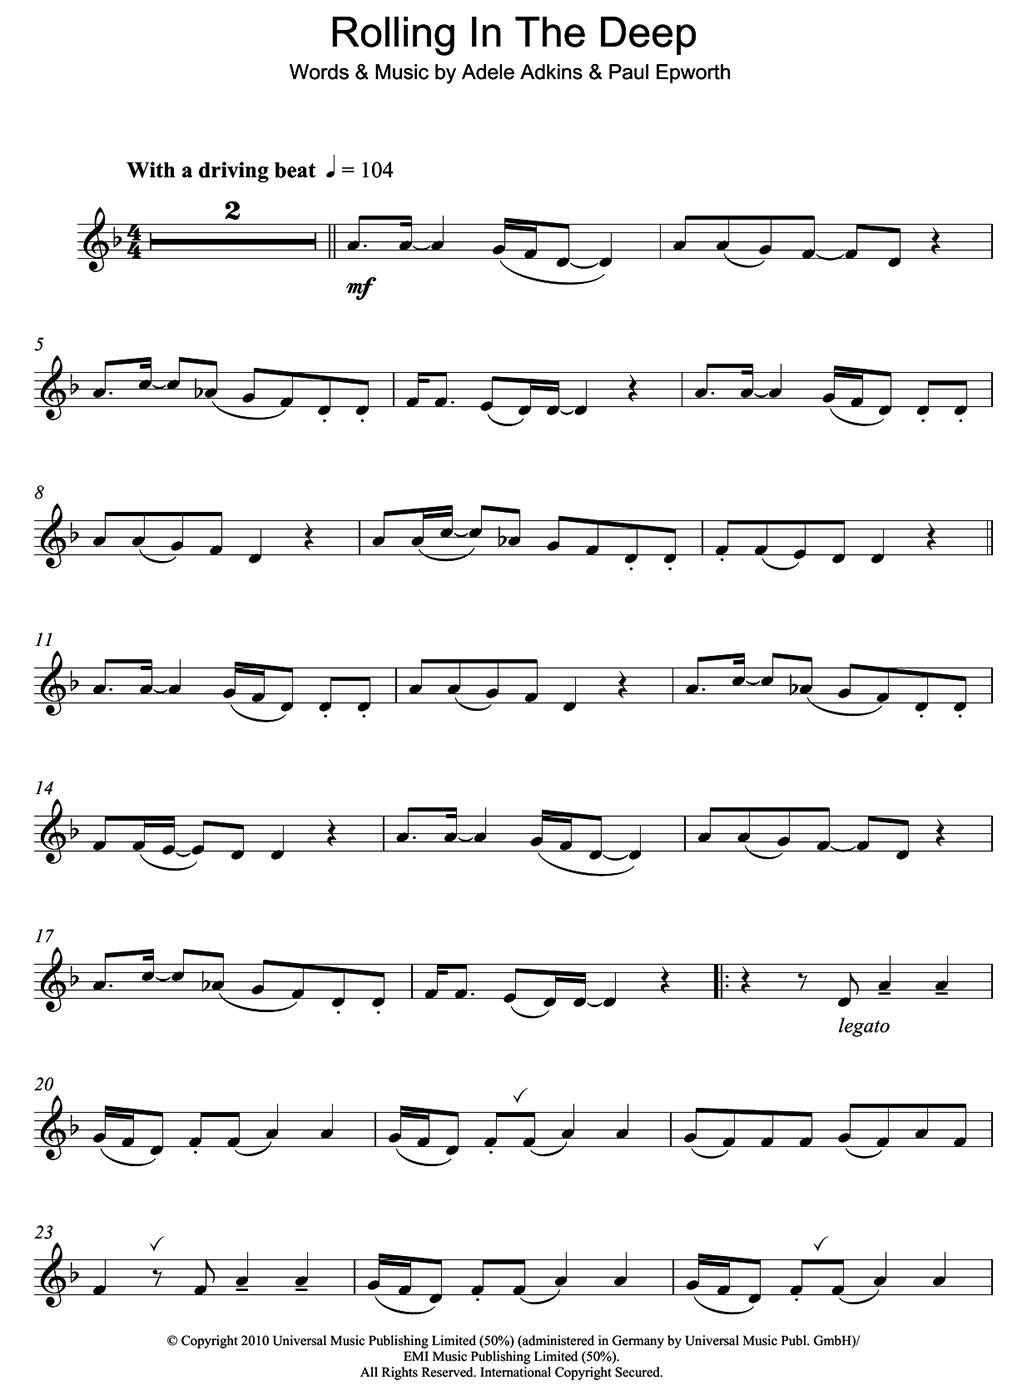 rolling in the deep sheet music notes